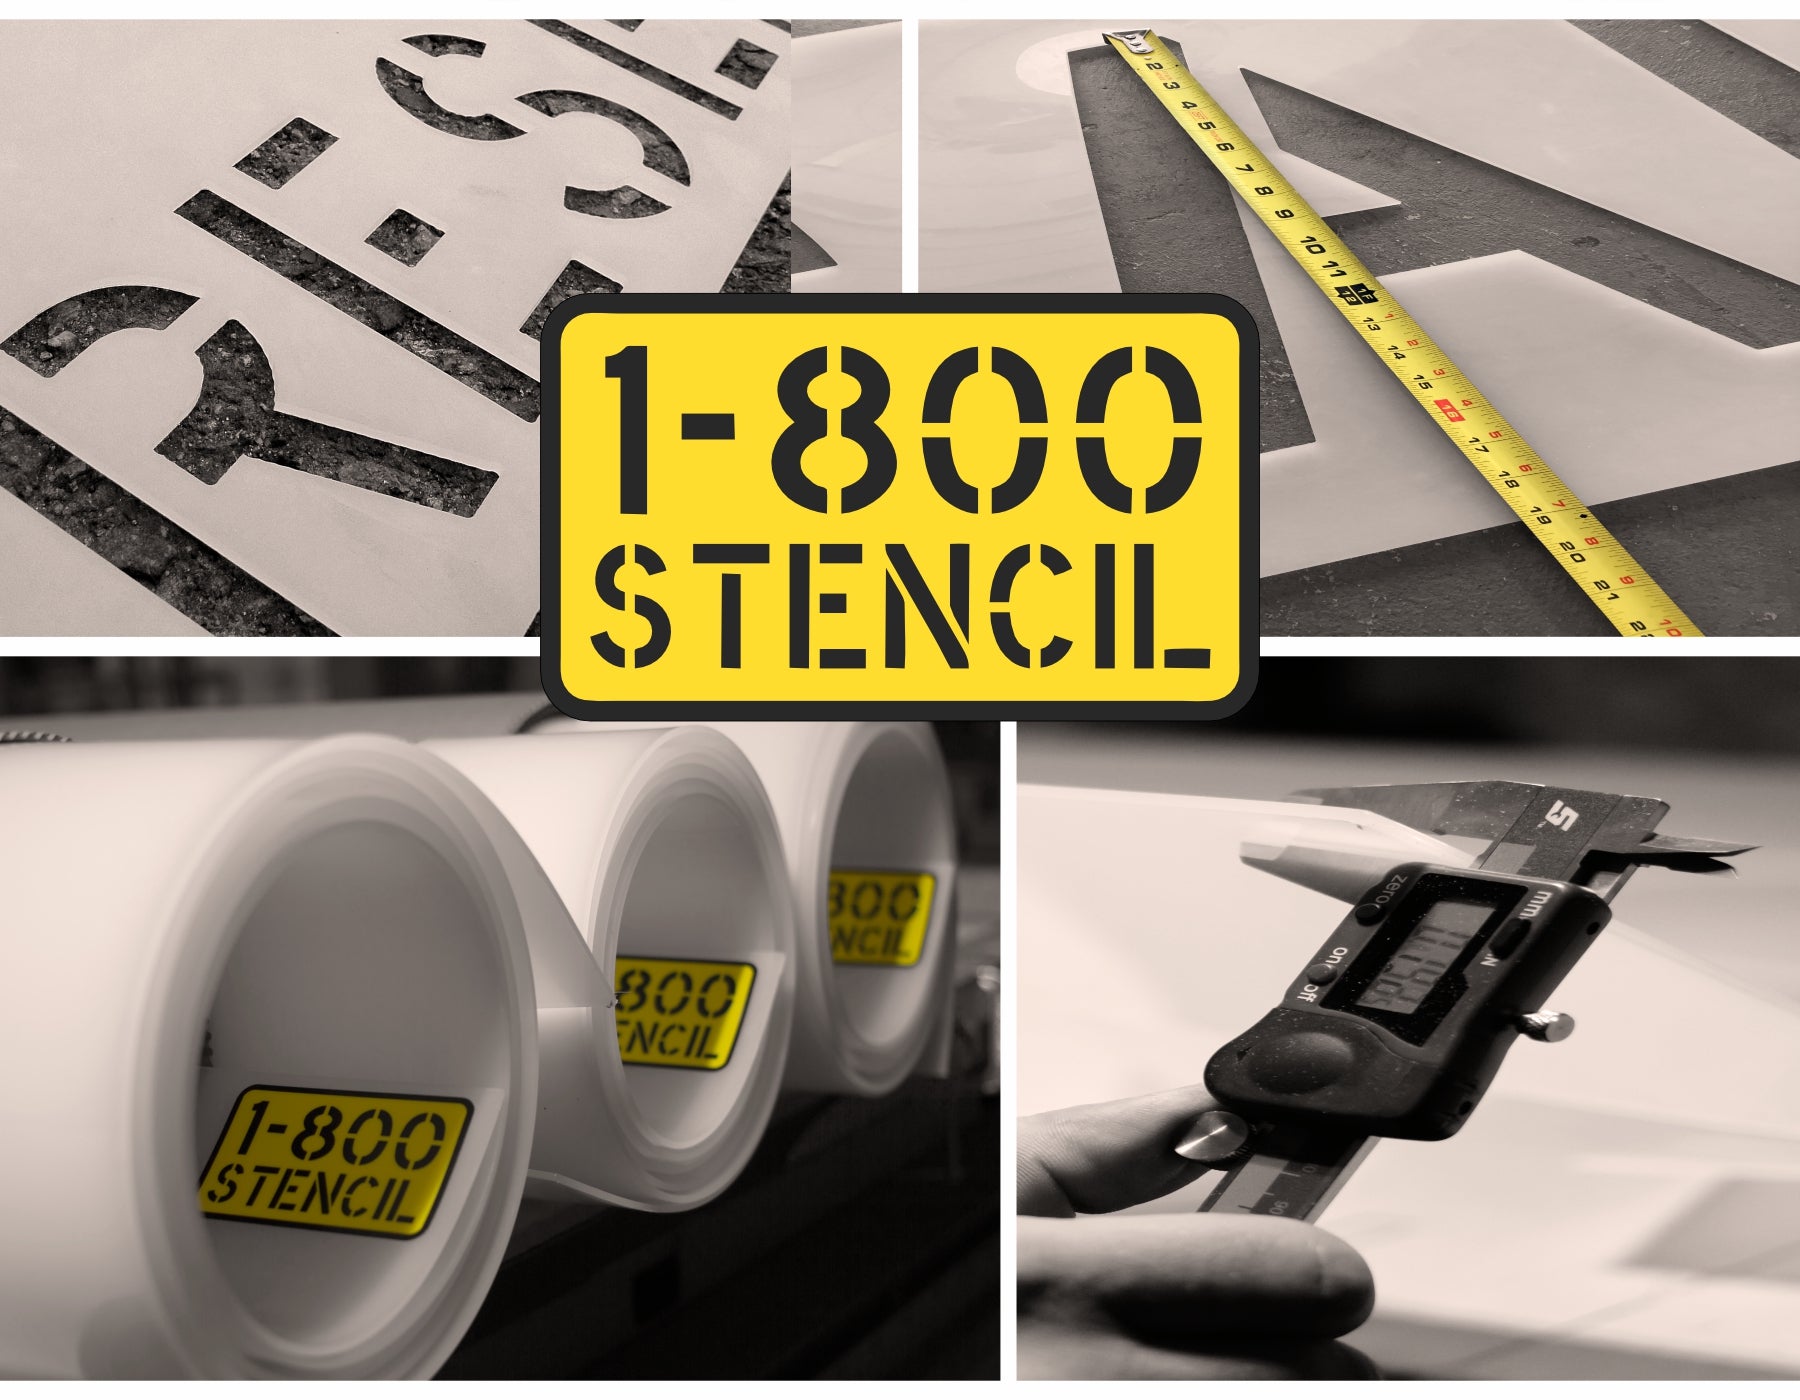 1-800-Stencils at RAE - Pavement Marking Stencils For The Professional Striping Contractor